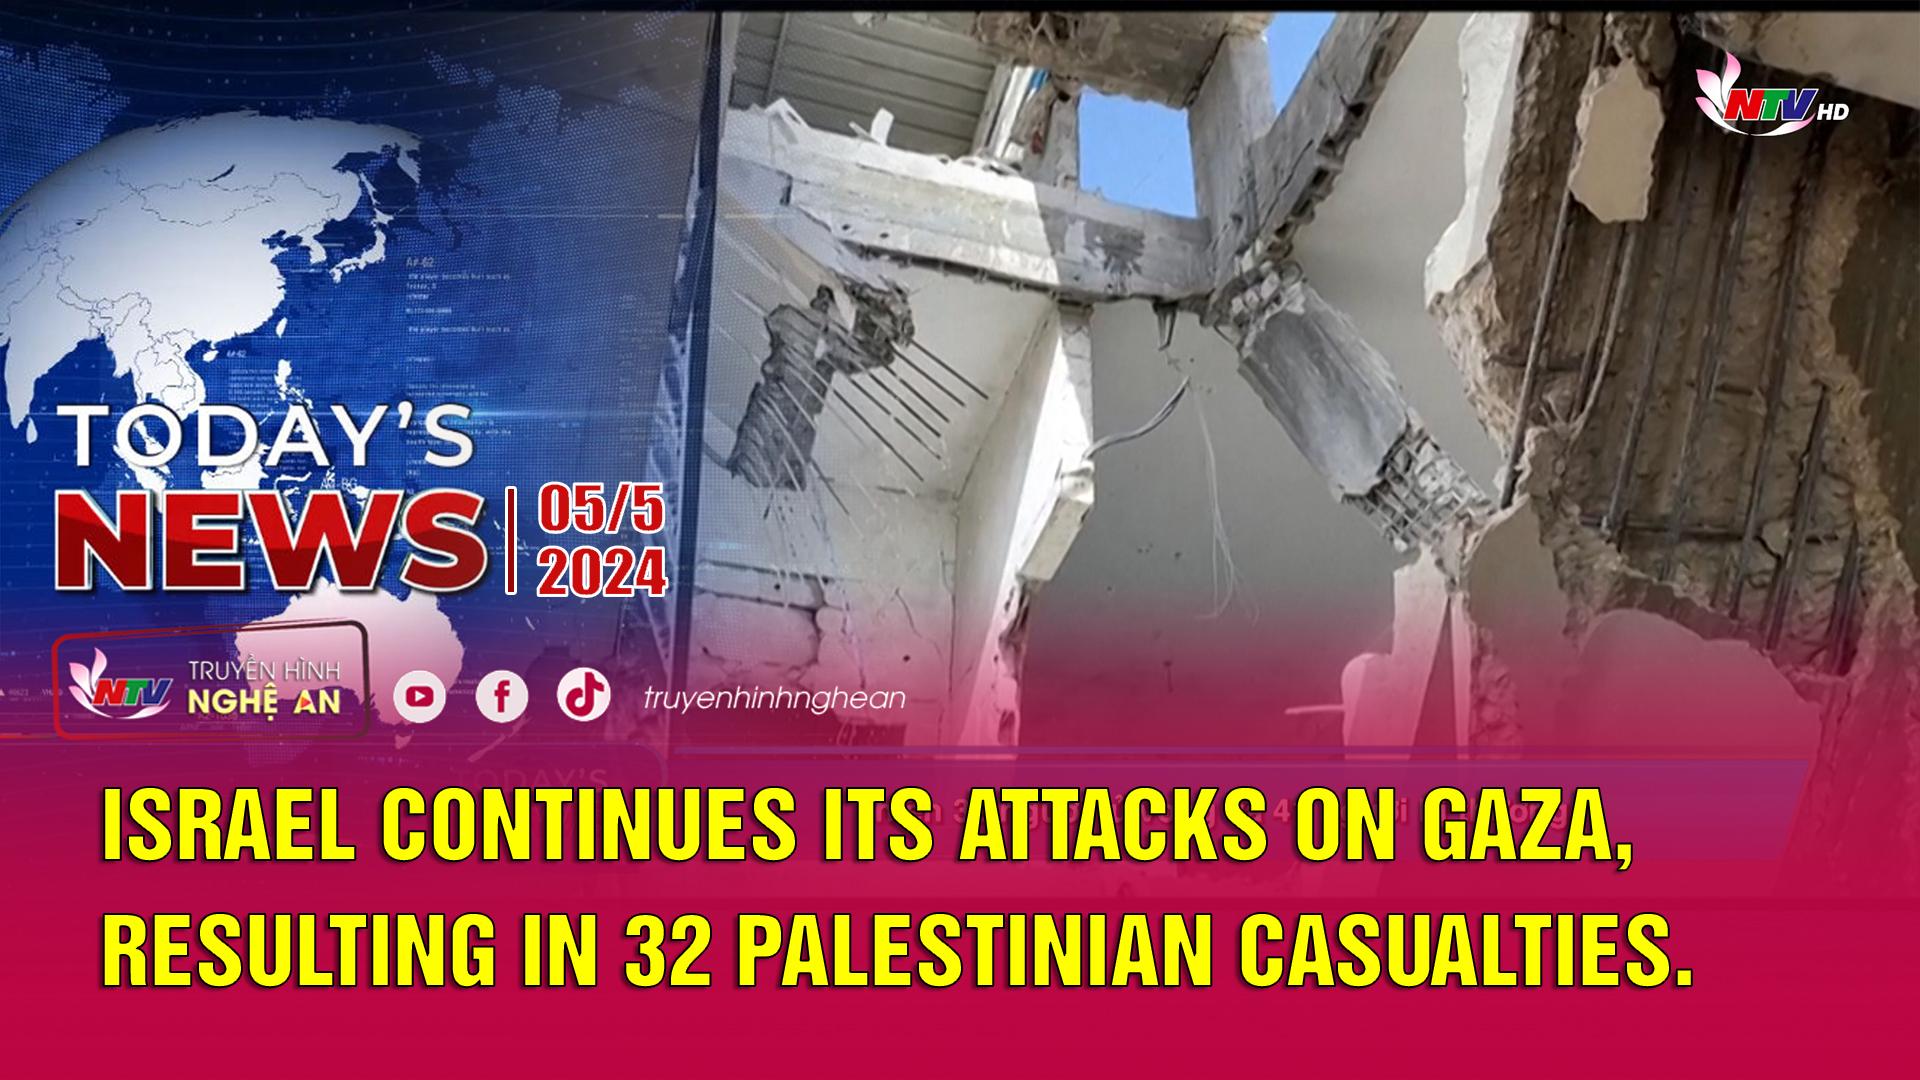 Today's News - 05/05/2024:  Israel continues its attacks on Gaza, resulting in 32 Palestinian casualties.